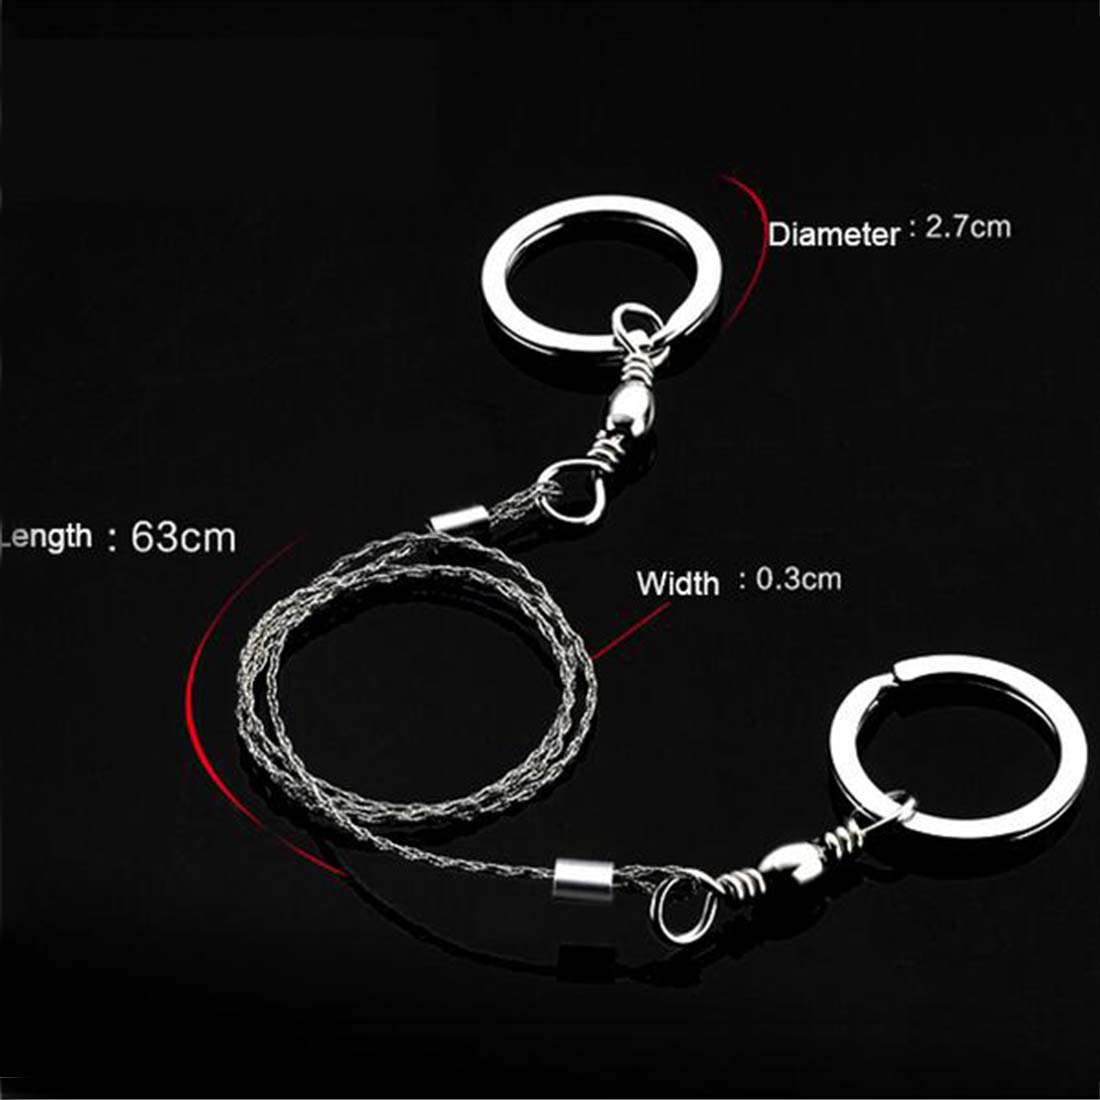 55cm Stainless Steel Wire Saw Emergency Travel Kit Camp Hike Scroll Outdoor Survive Silver Tool Hunt Cut Equipment